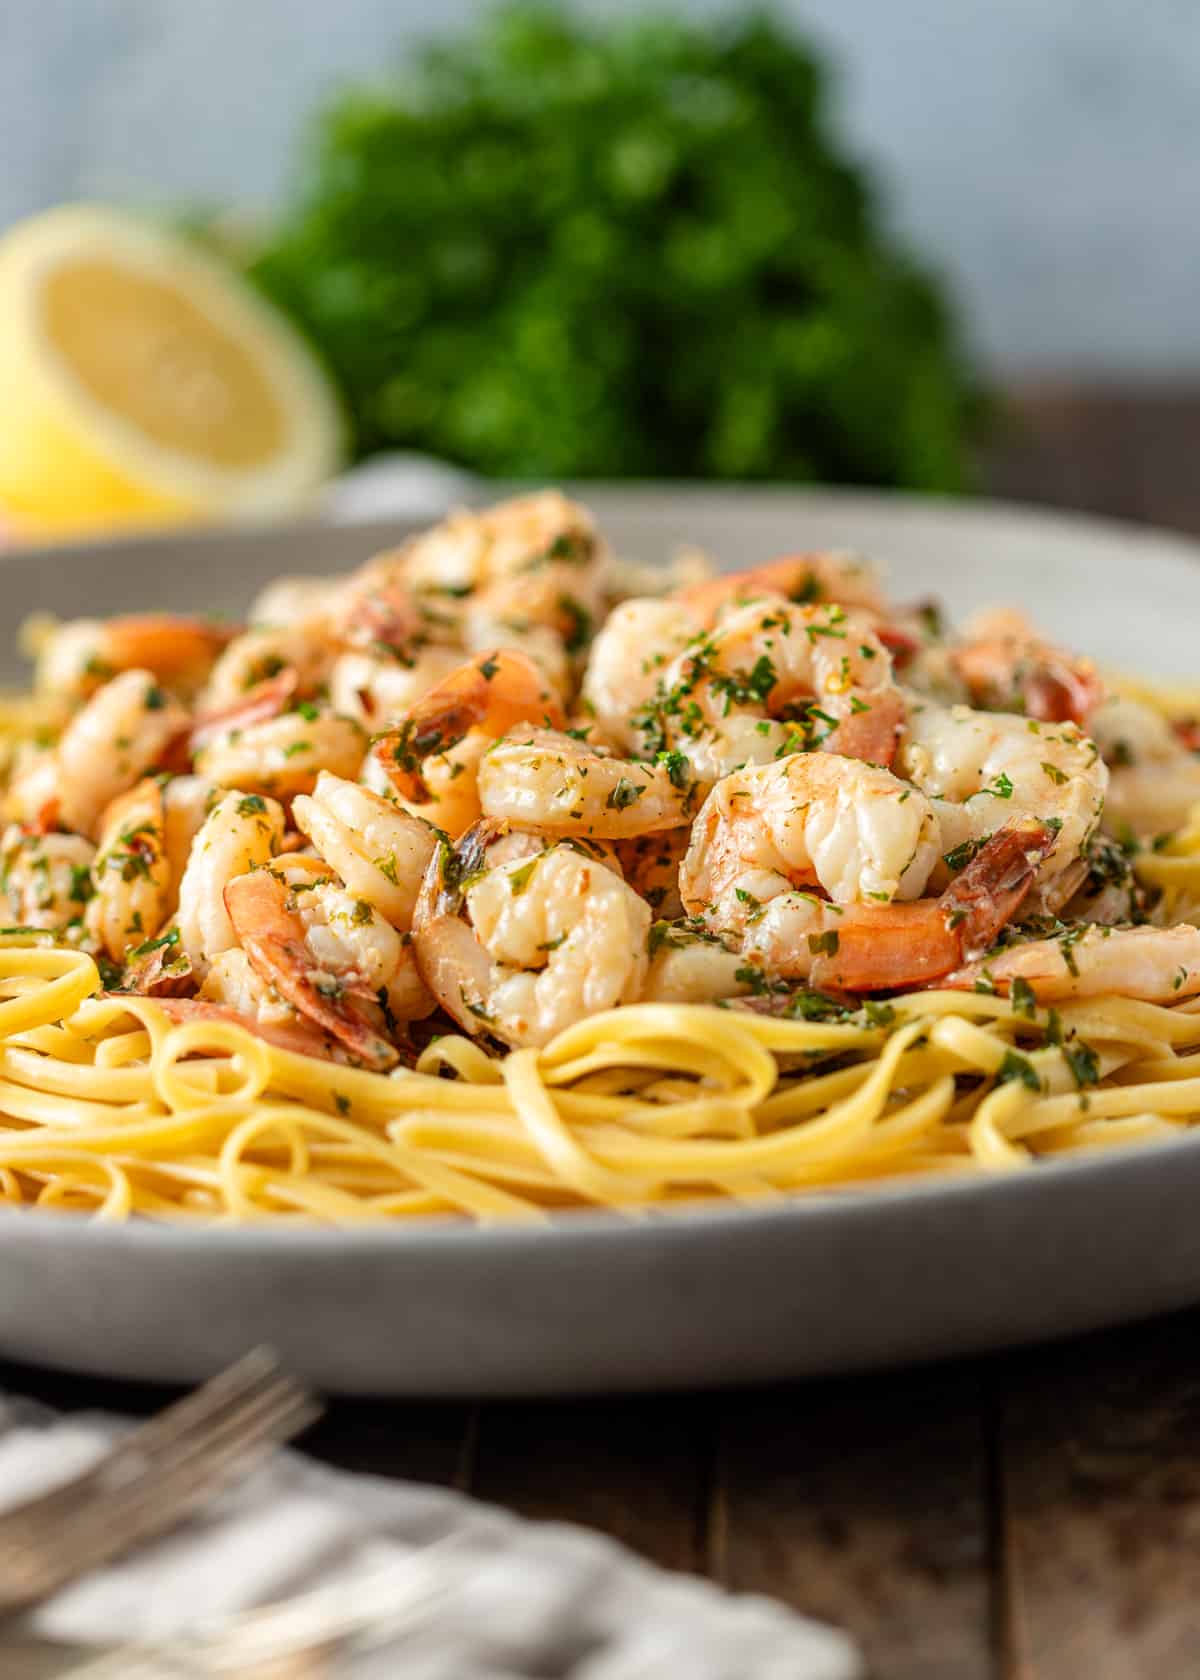 side view: shrimp scampi over linguine with herbs showing